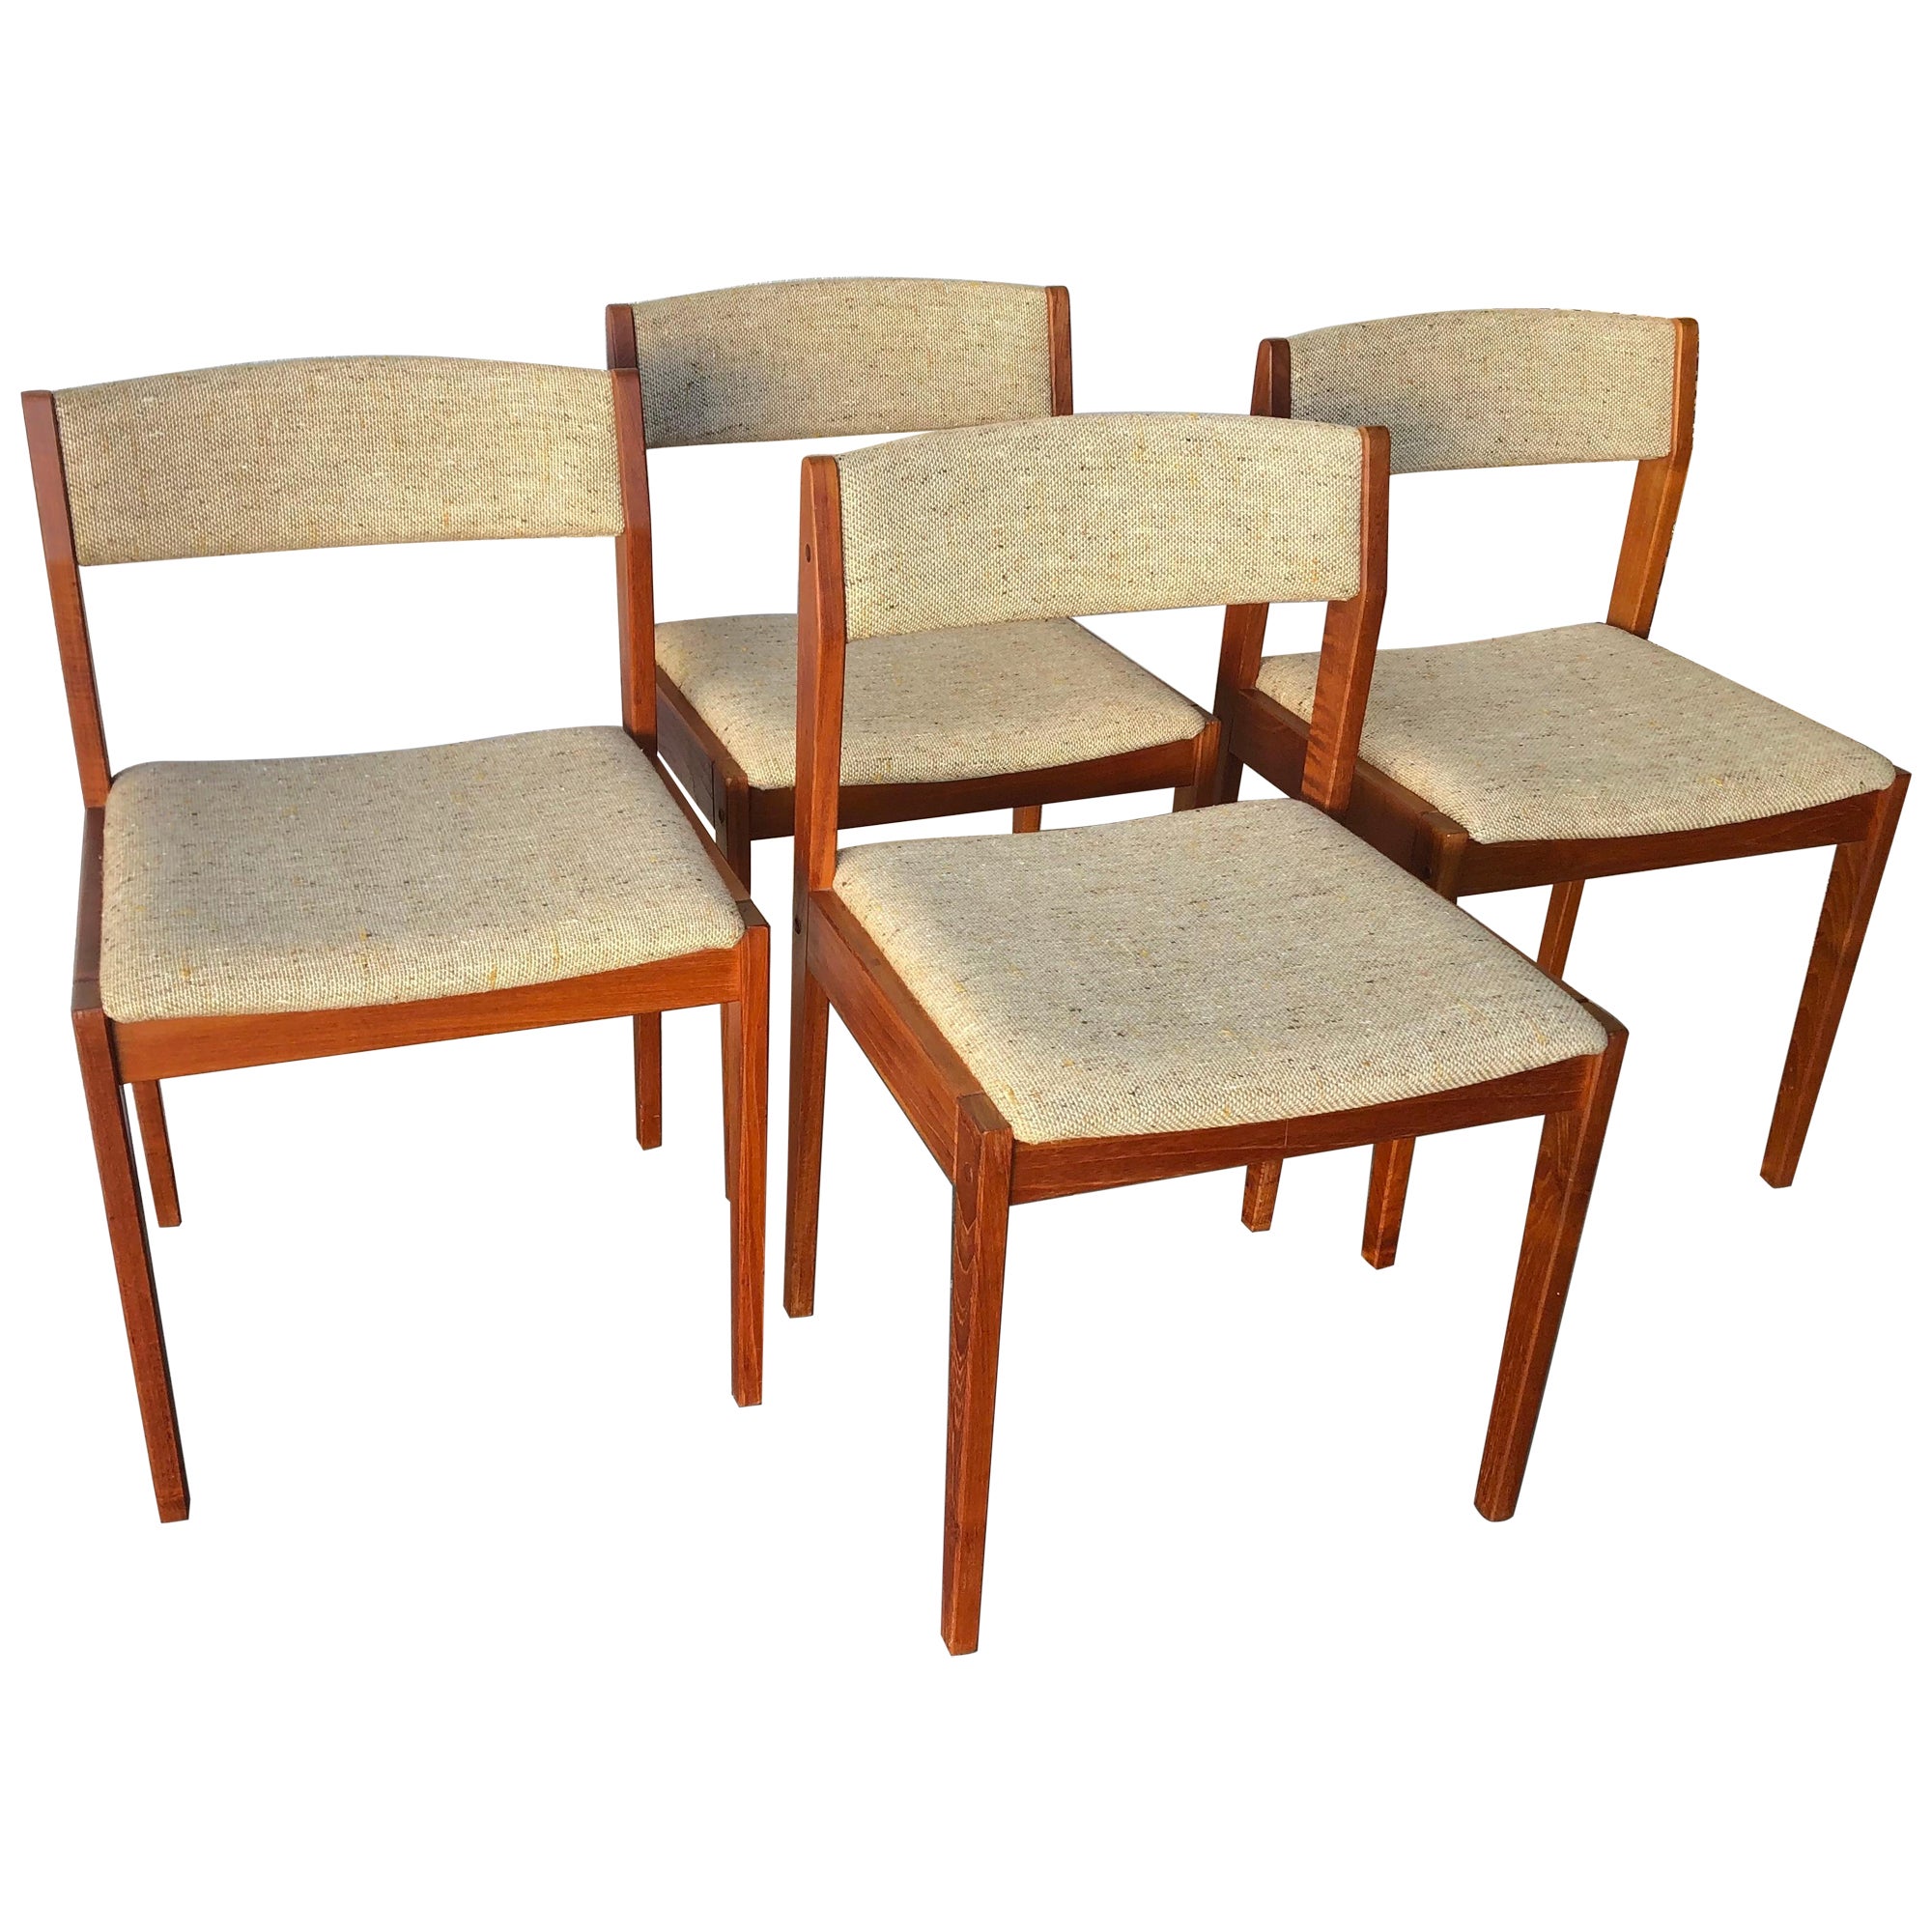 Set of Four Mid Century Danish Modern Dining Chairs by Tarm Stole Mobelfabrik For Sale